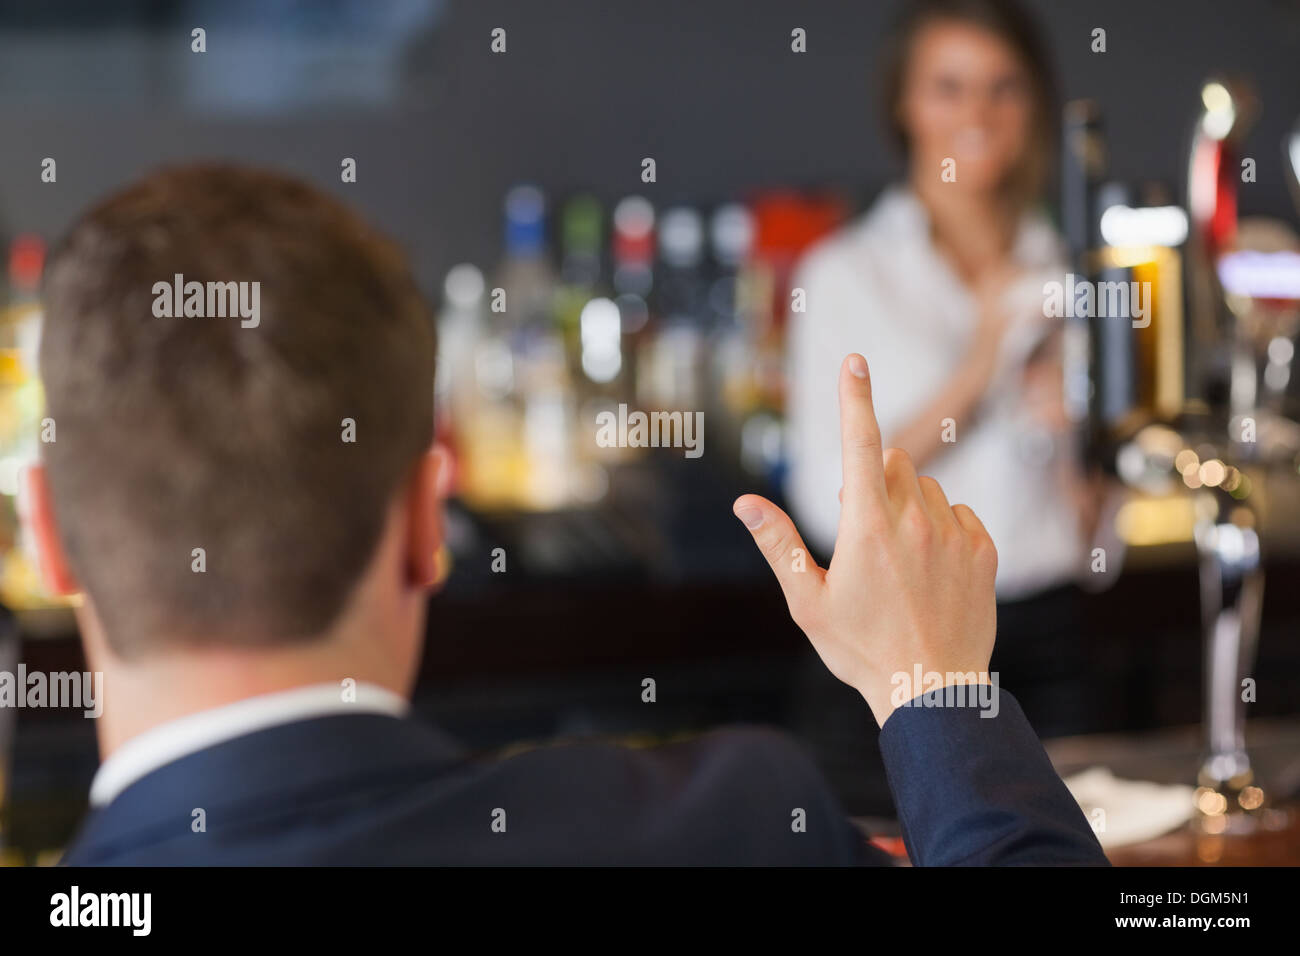 Handsome man ordering a drink from pretty waitress Stock Photo